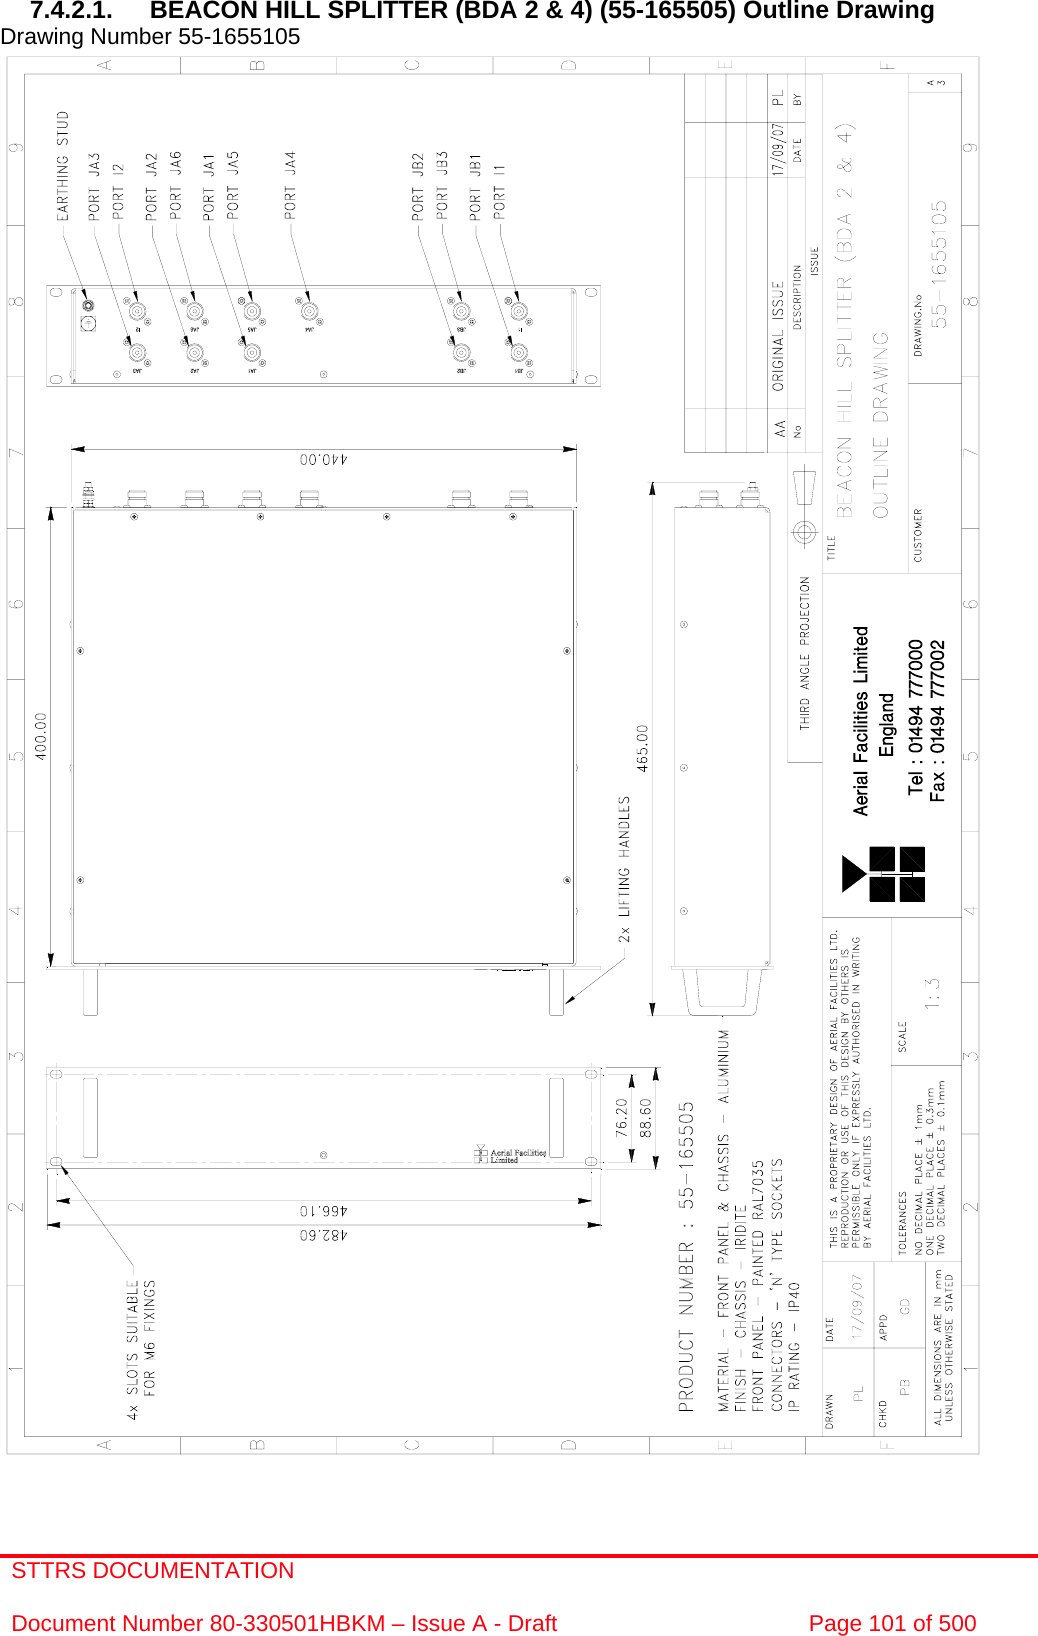 STTRS DOCUMENTATION  Document Number 80-330501HBKM – Issue A - Draft  Page 101 of 500   7.4.2.1.  BEACON HILL SPLITTER (BDA 2 &amp; 4) (55-165505) Outline Drawing  Drawing Number 55-1655105                                                       